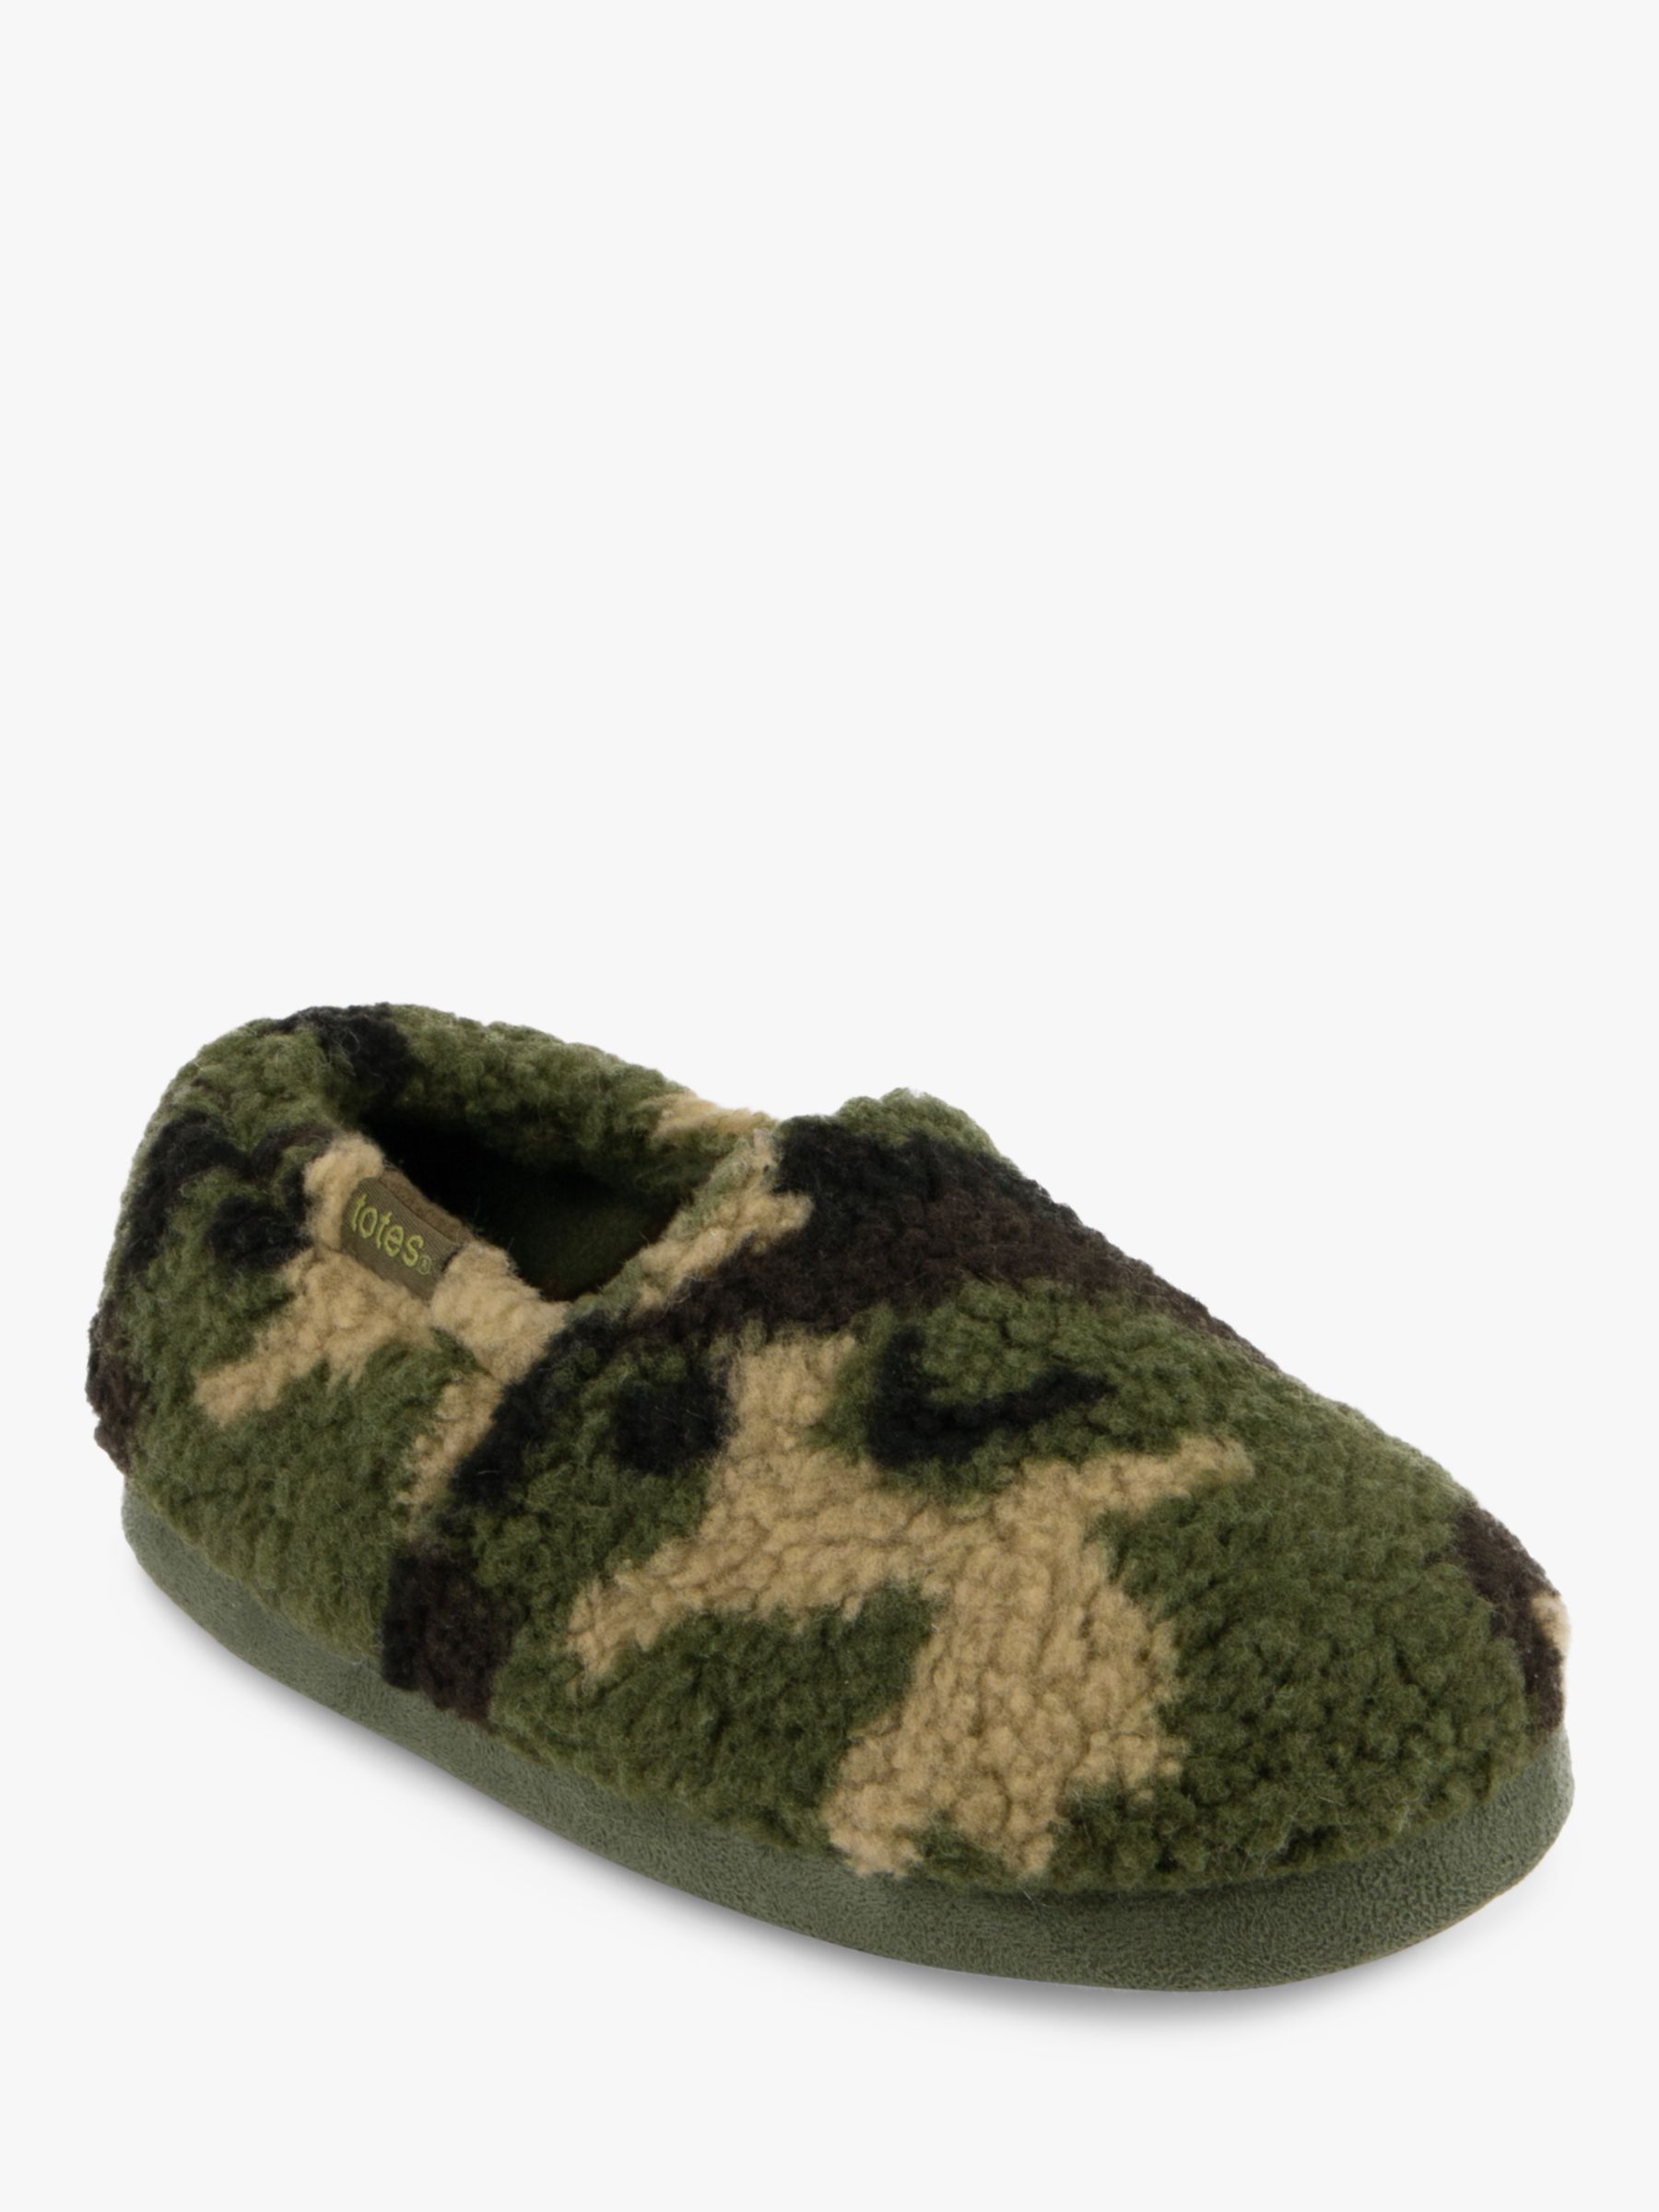 totes Kids' Camouflage Slippers, Green/Black, 11-12 Jnr